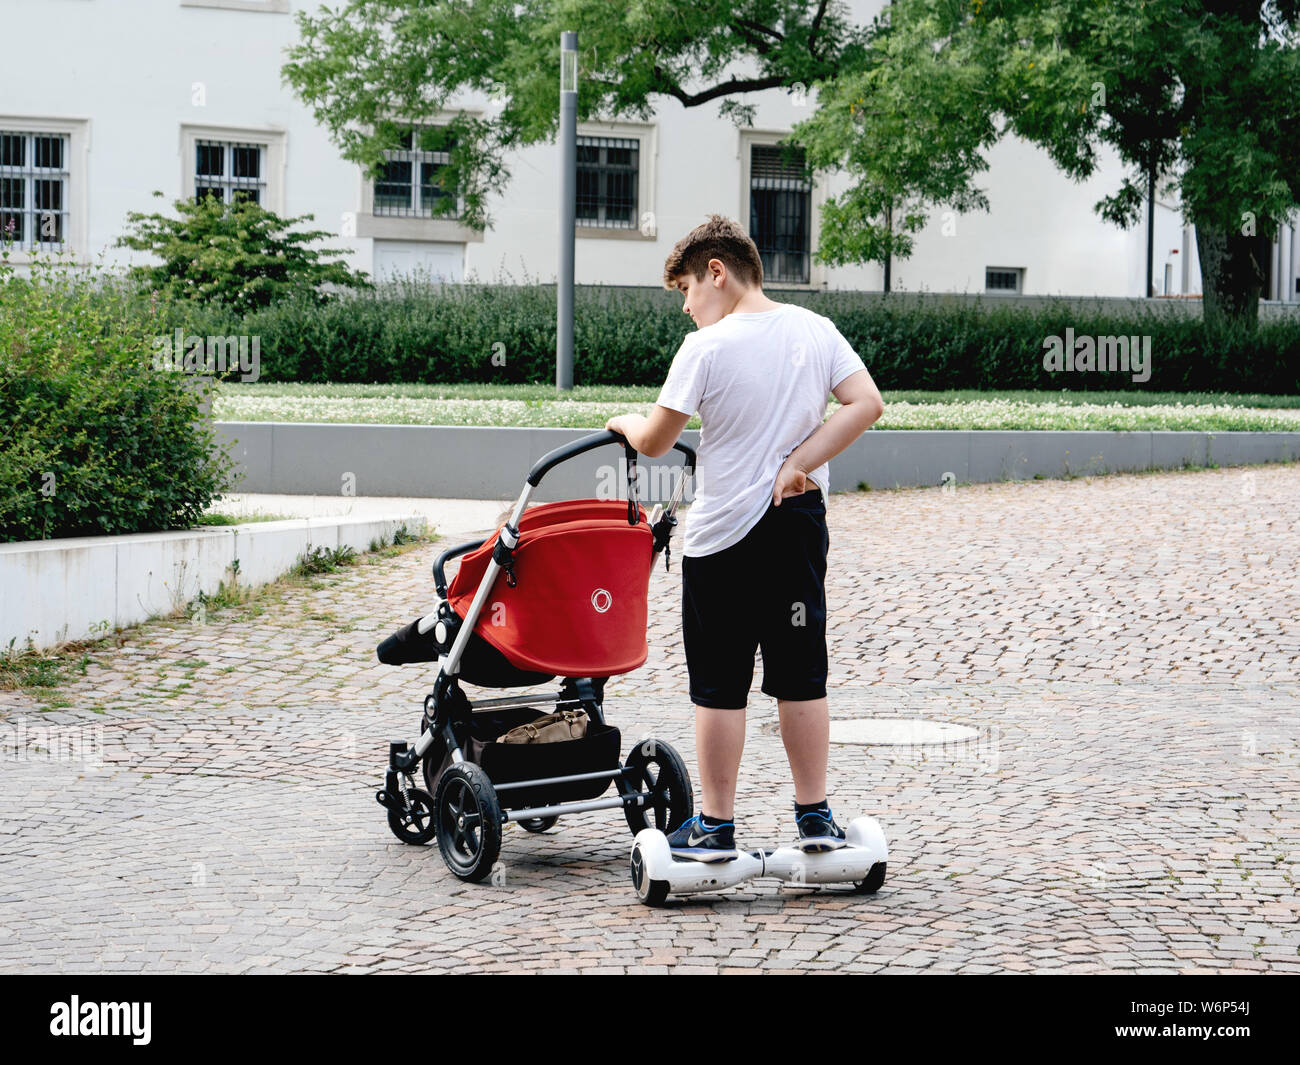 hotel perro Pocos Baden-Baden, Germany - Jul 7, 2019: Lazy young man pushing cart stroller  with baby while riding a electric hoverboard on the cobblestone streets of  Baden-Baden Stock Photo - Alamy